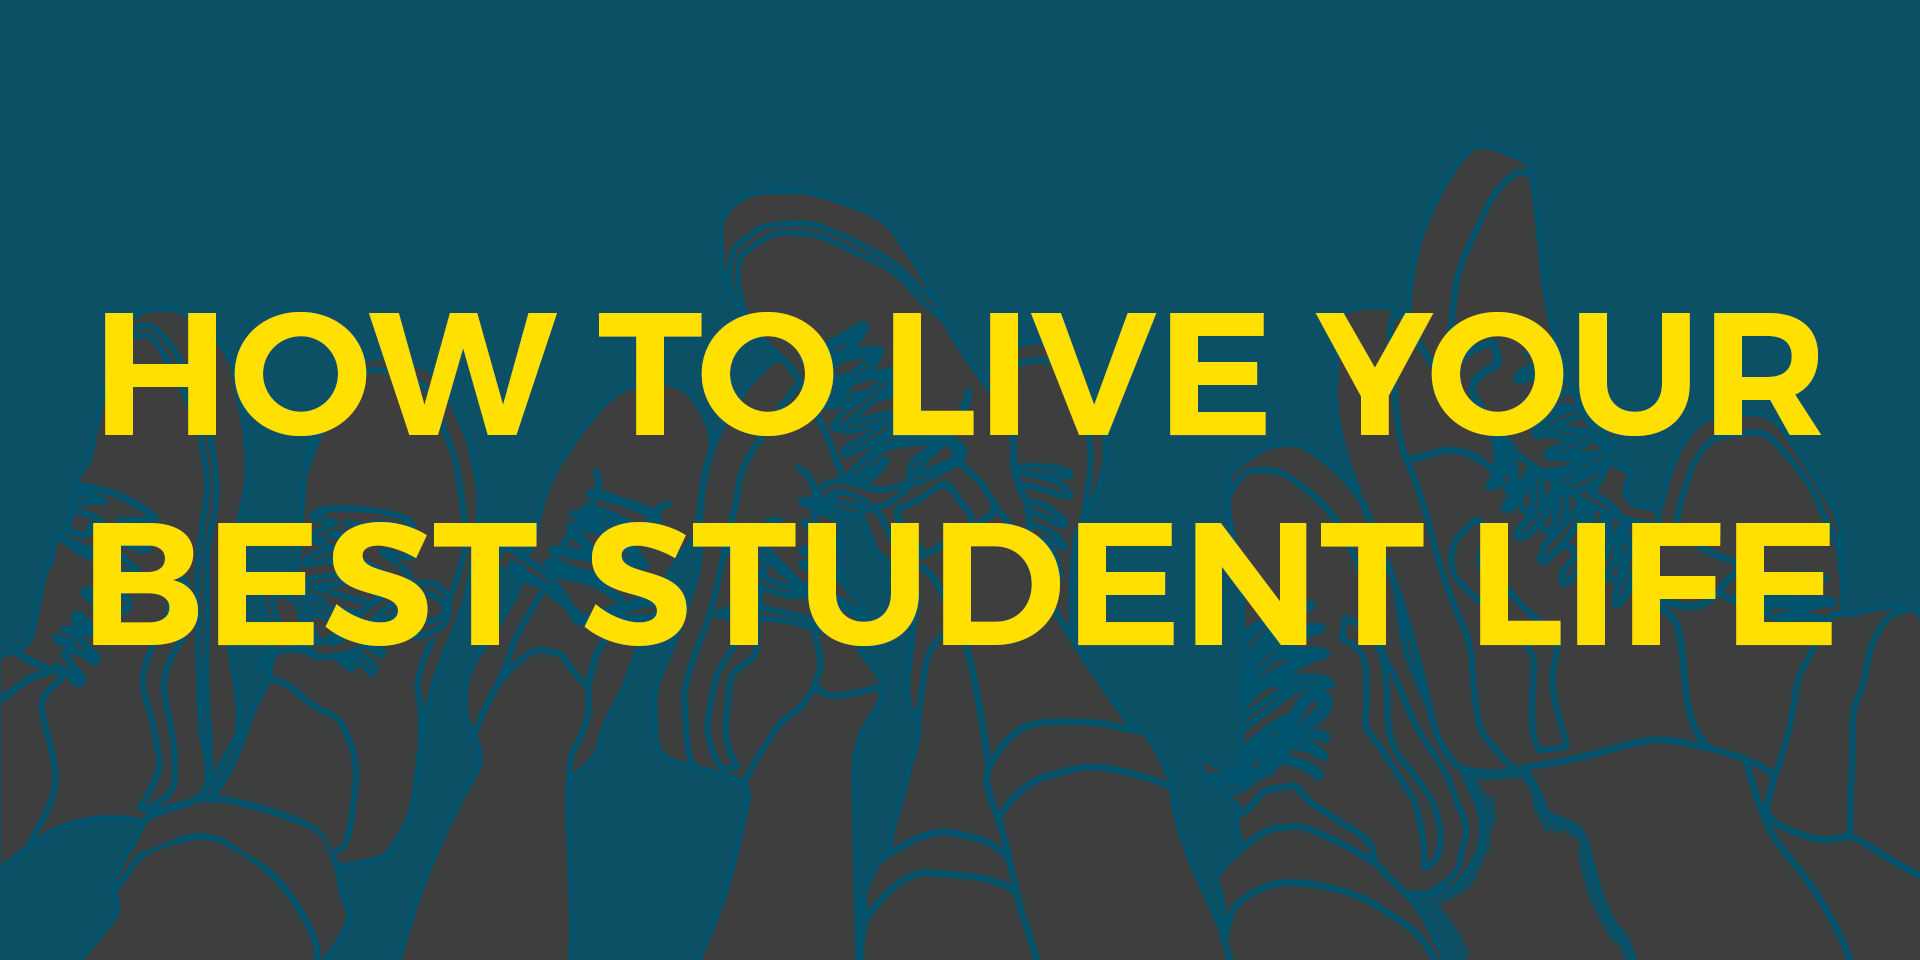 How To Live Your Best Student Life